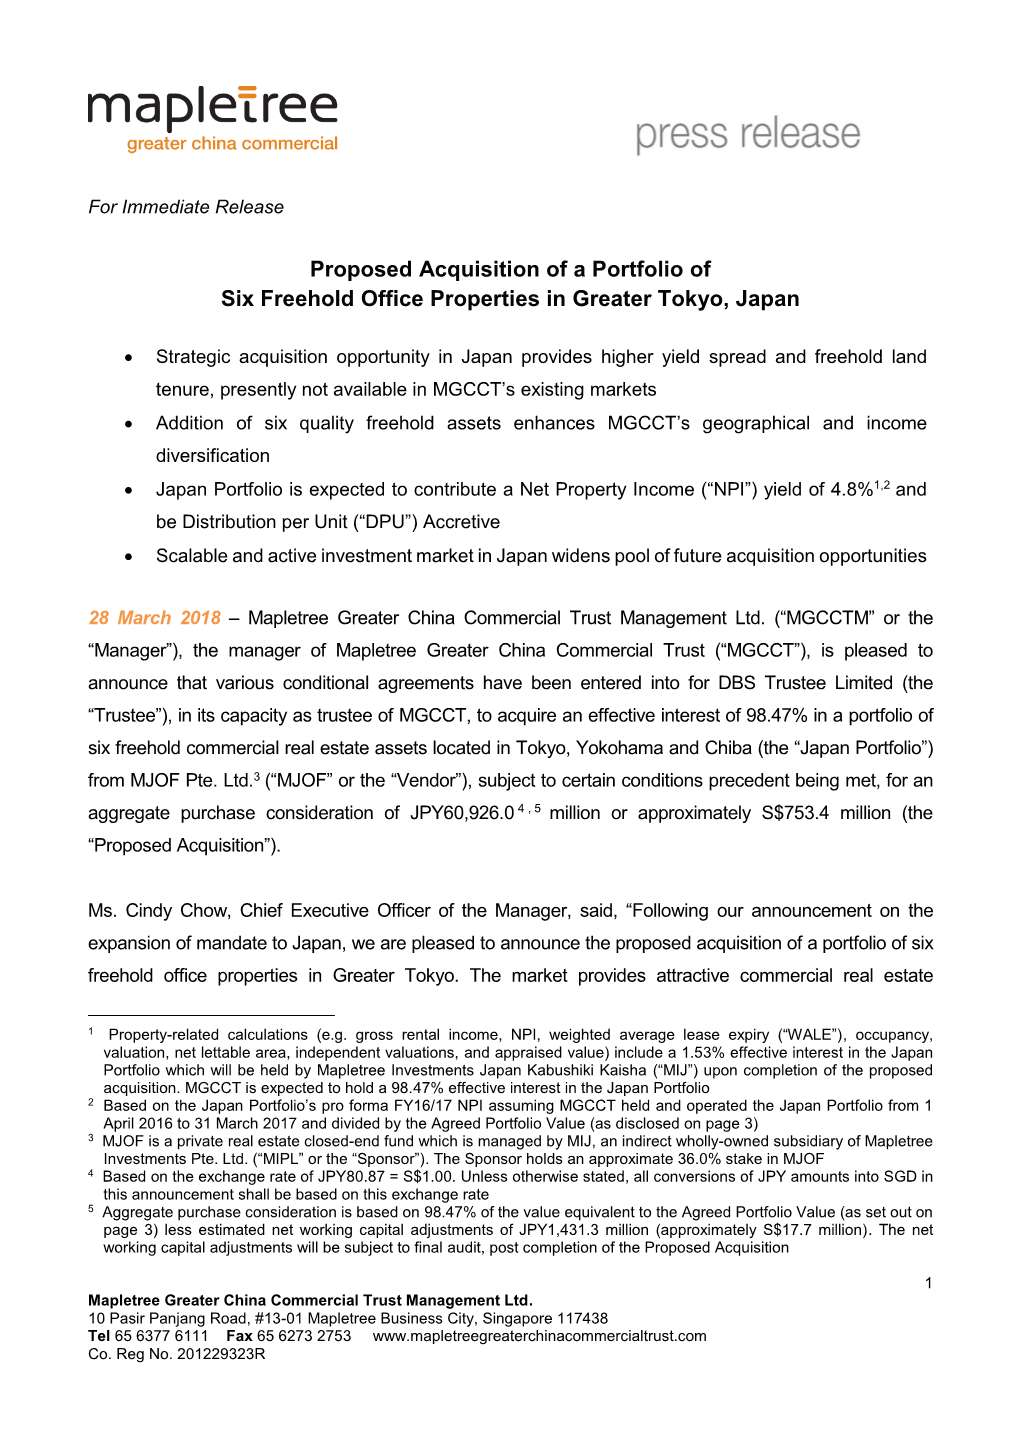 Proposed Acquisition of a Portfolio of Six Freehold Office Properties in Greater Tokyo, Japan